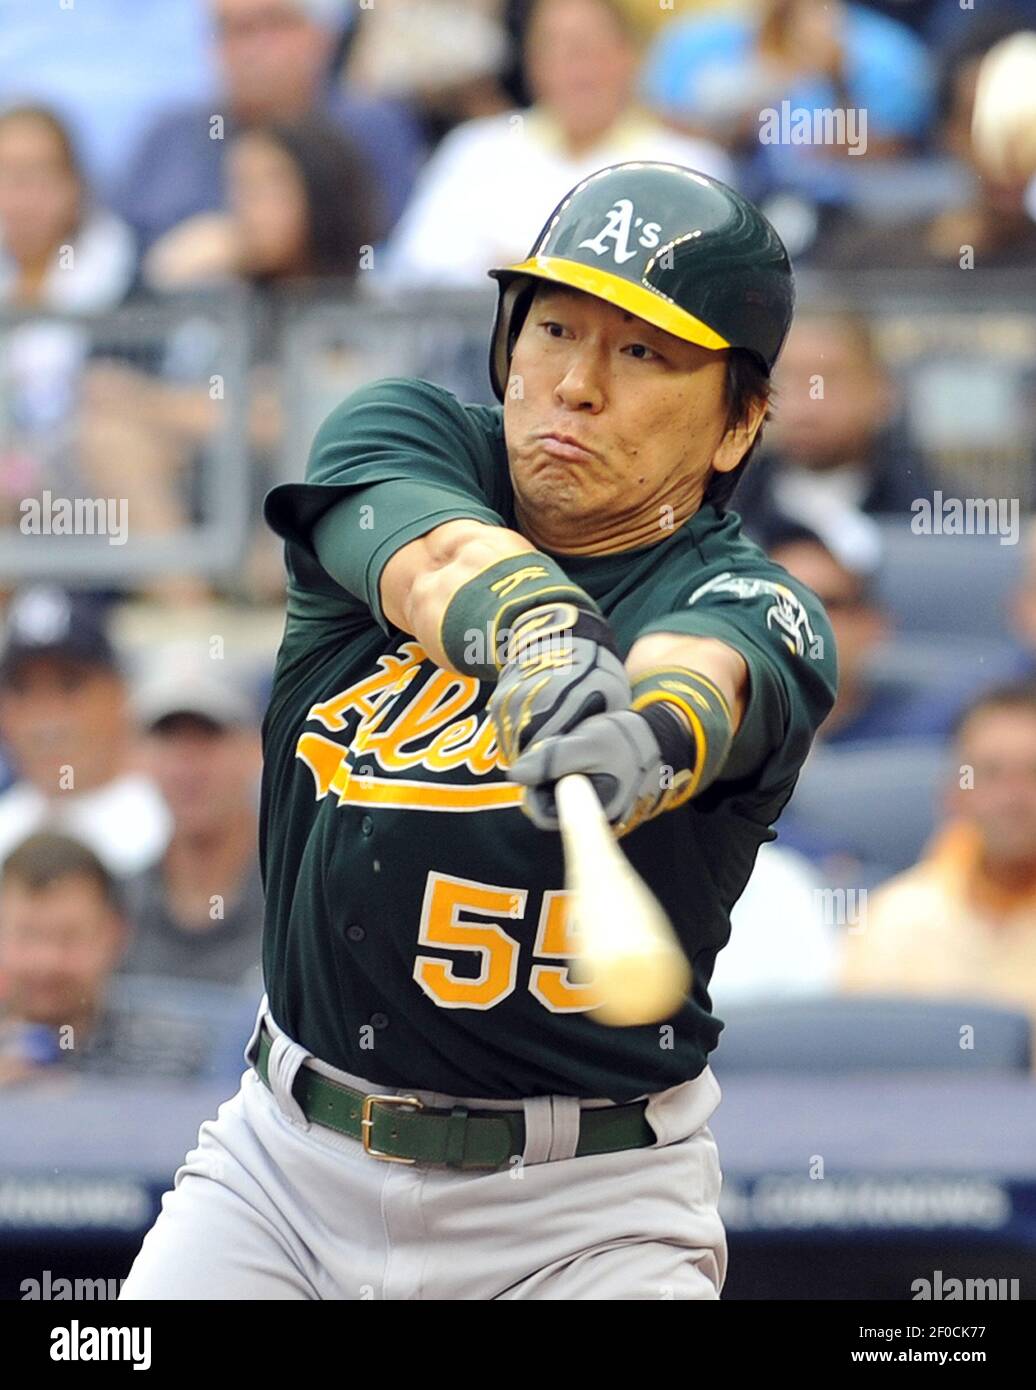 Hideki Matsui of the Oakland A's bats against the New York Yankees